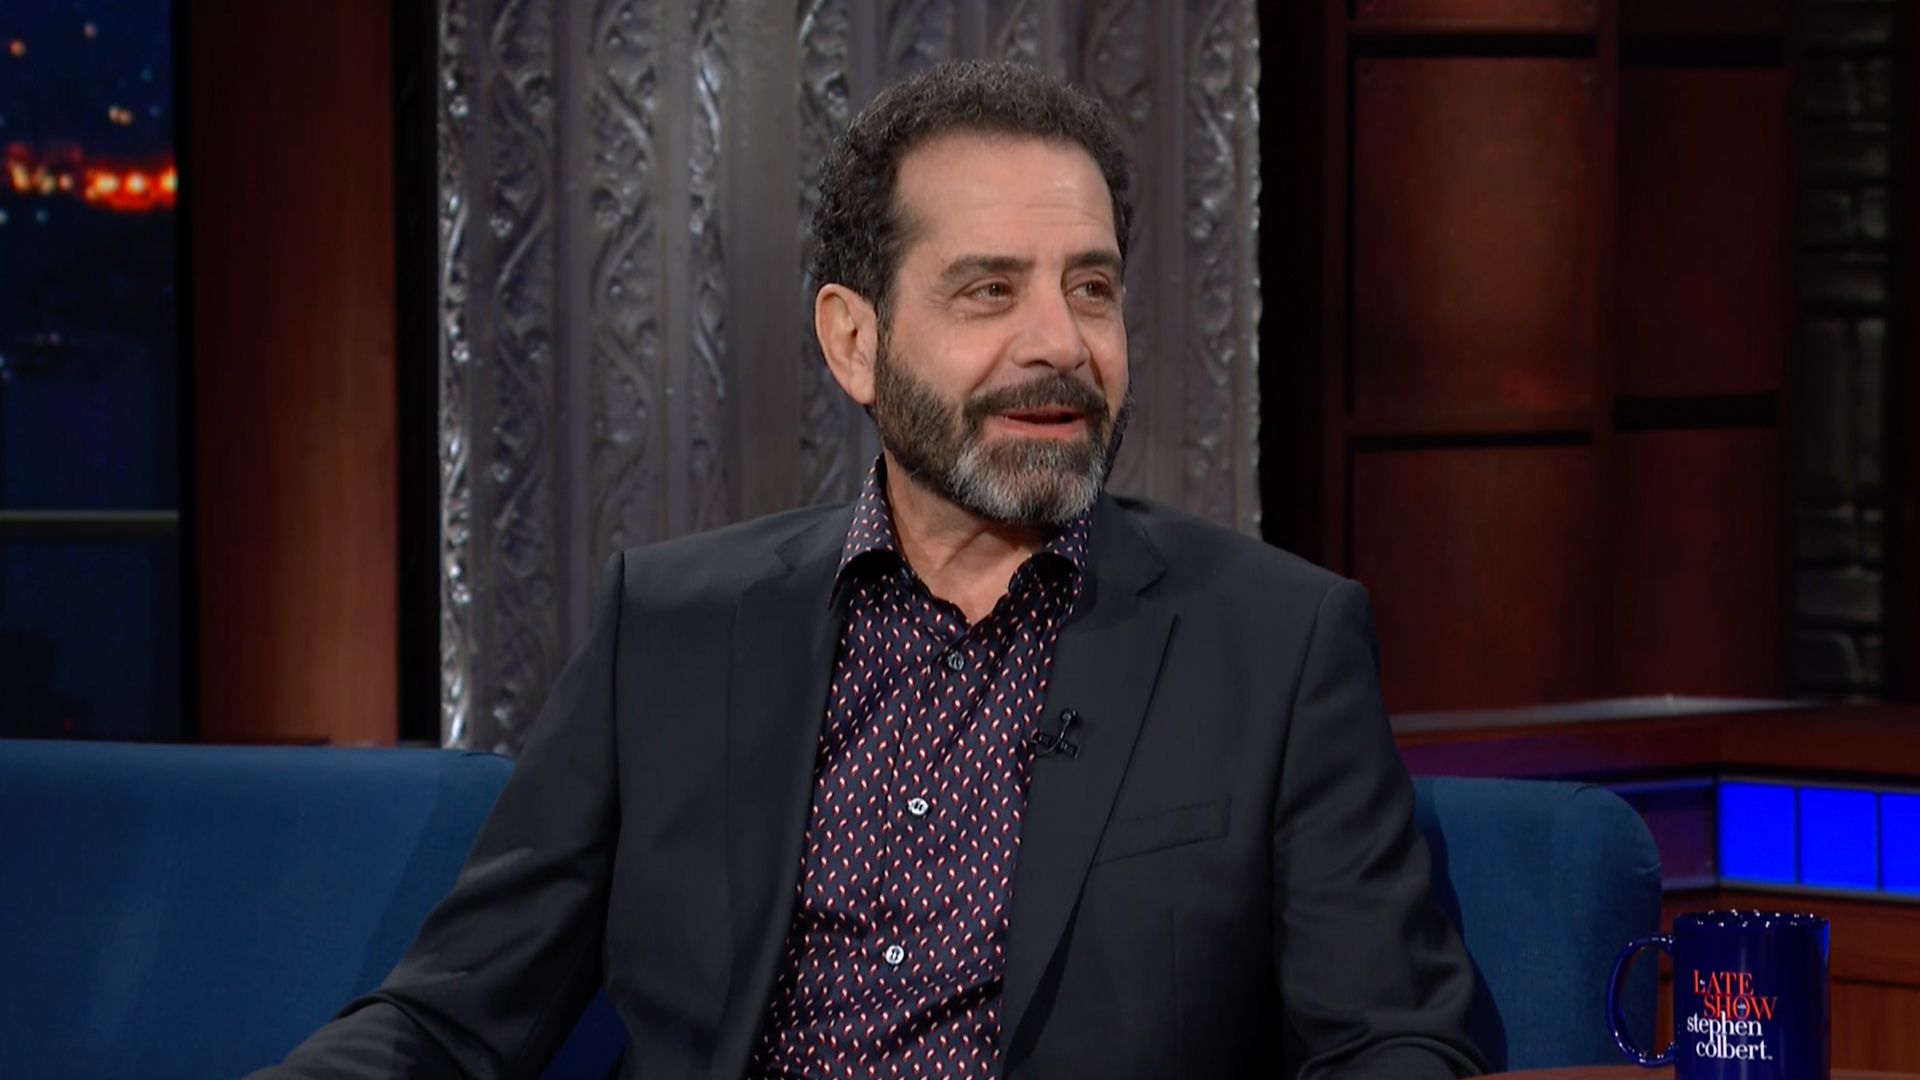 Watch The Late Show with Stephen Colbert: Tony Shalhoub Learned That Kids Don't Appreciate Paris show on CBS All Access